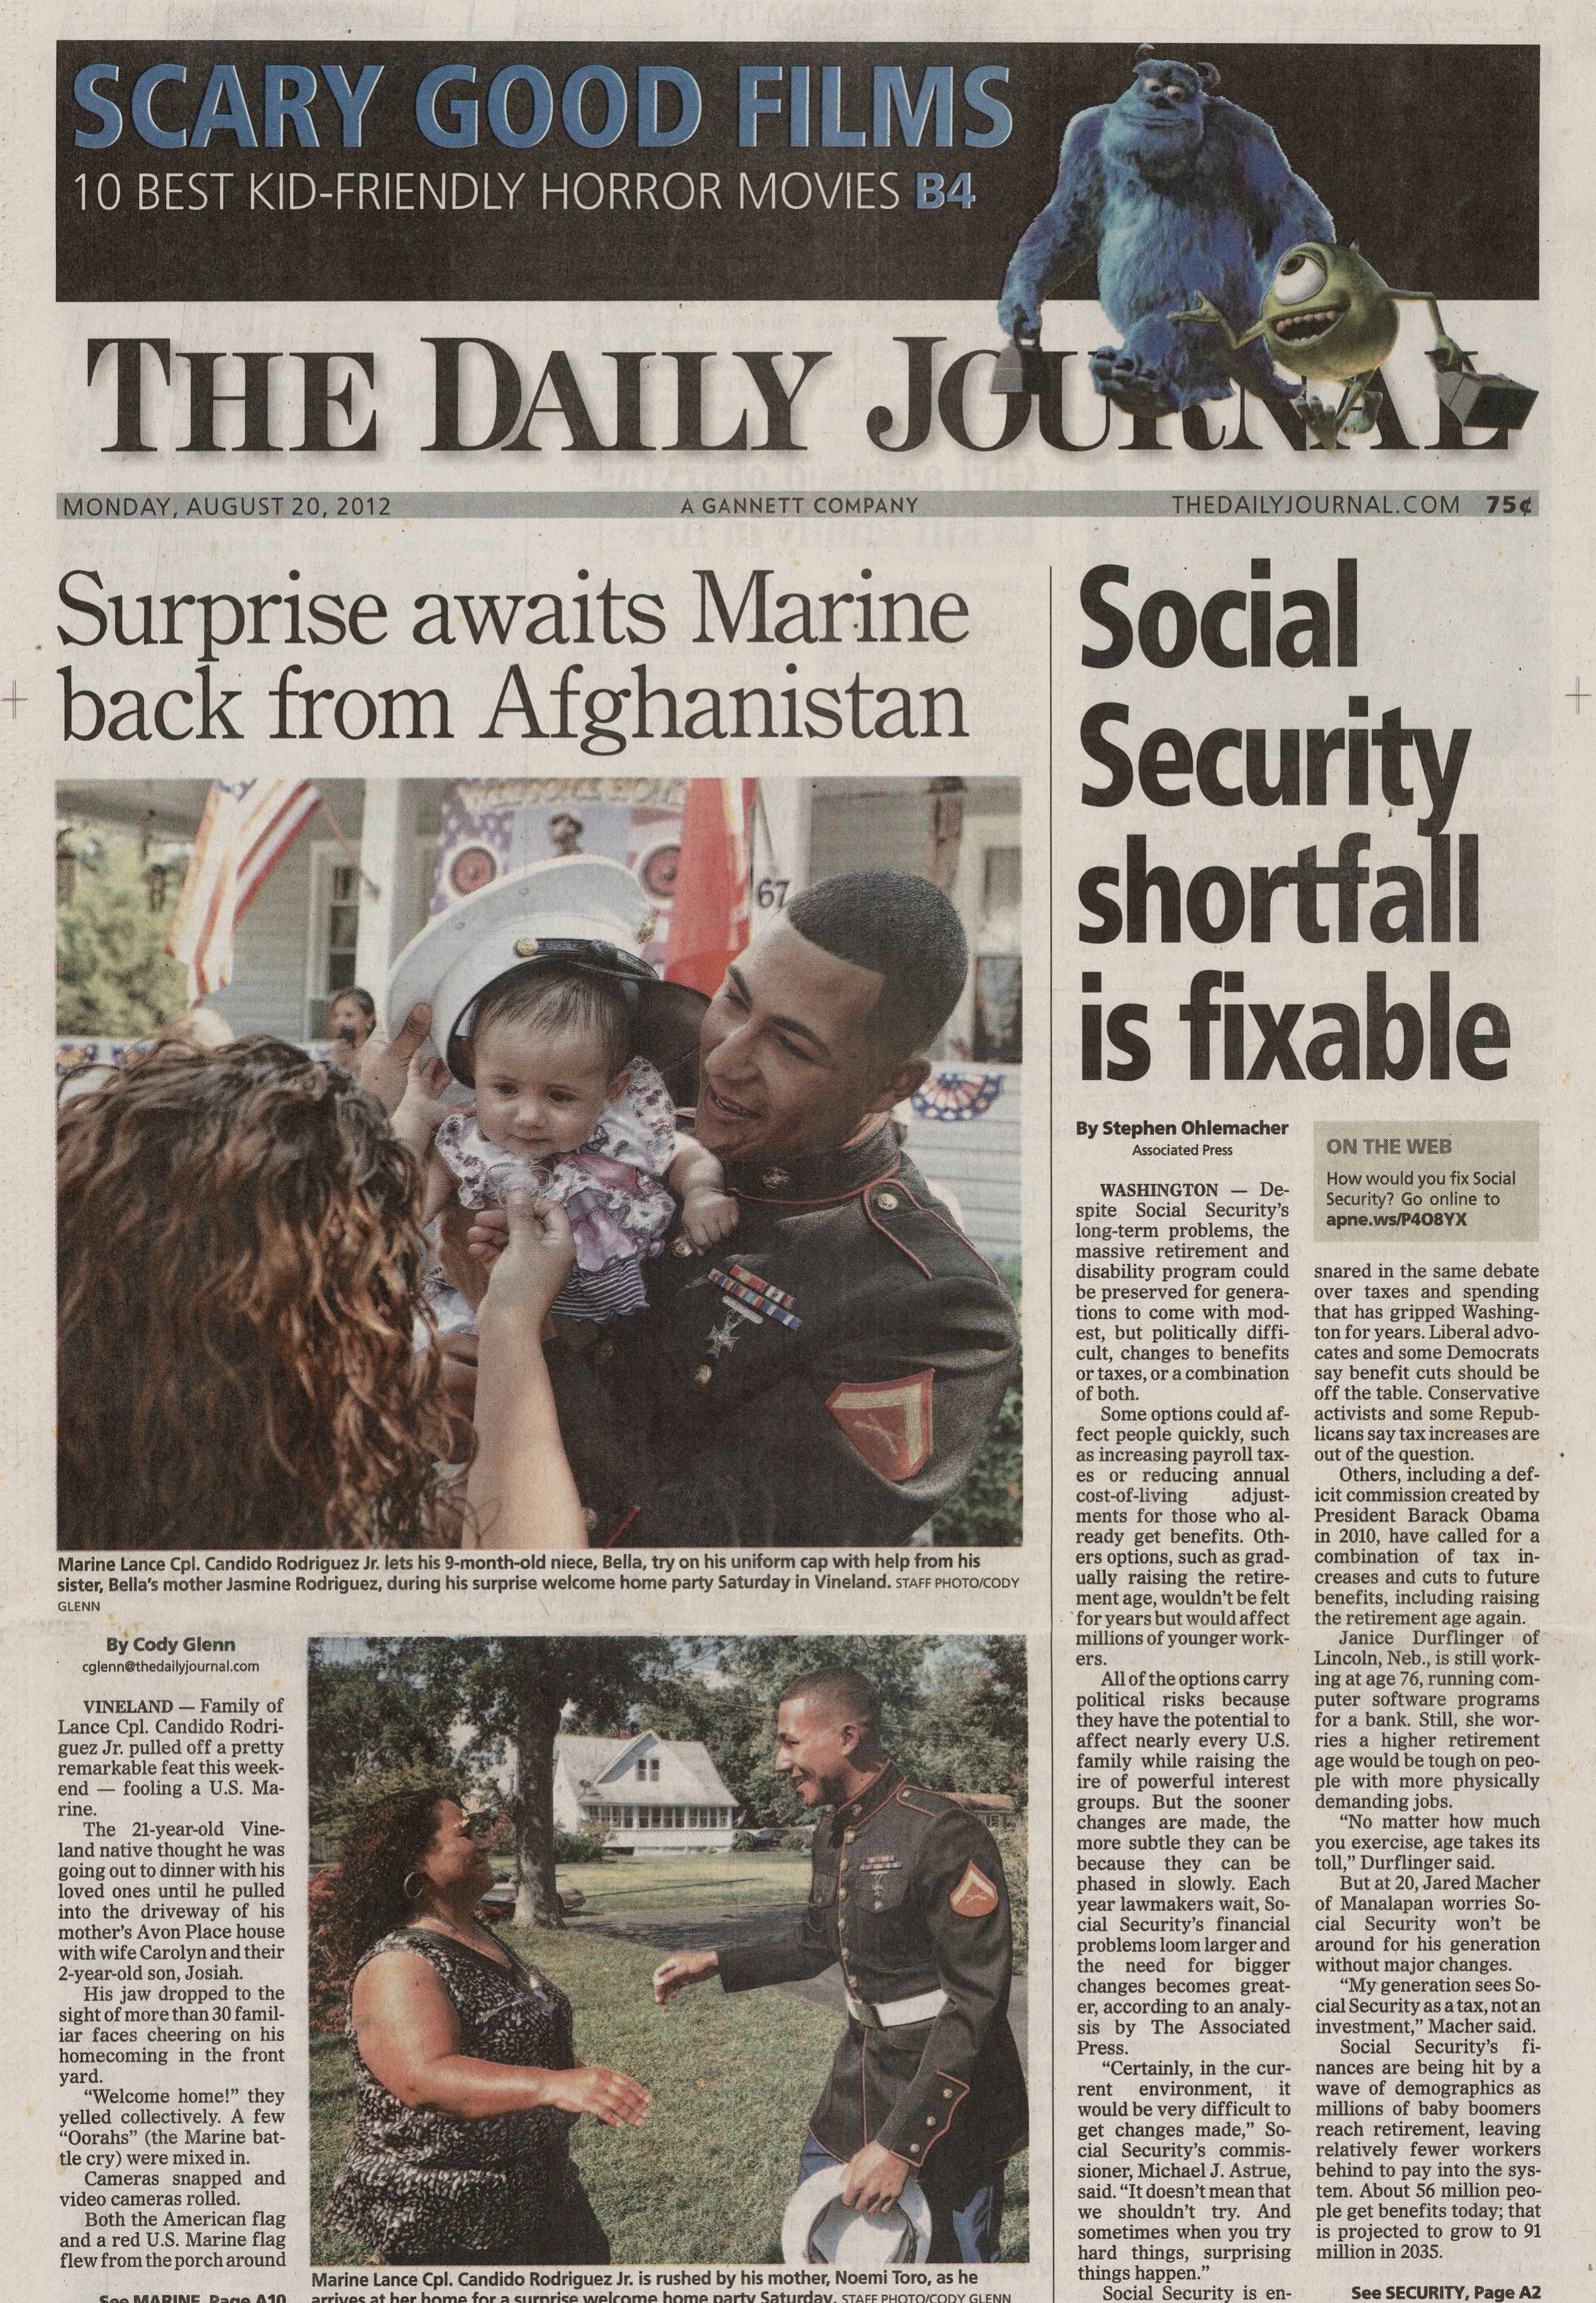  Marine Candido Rodriguez greeted by a surprise welcome homecoming August 20 2012 /  The Daily Journal  